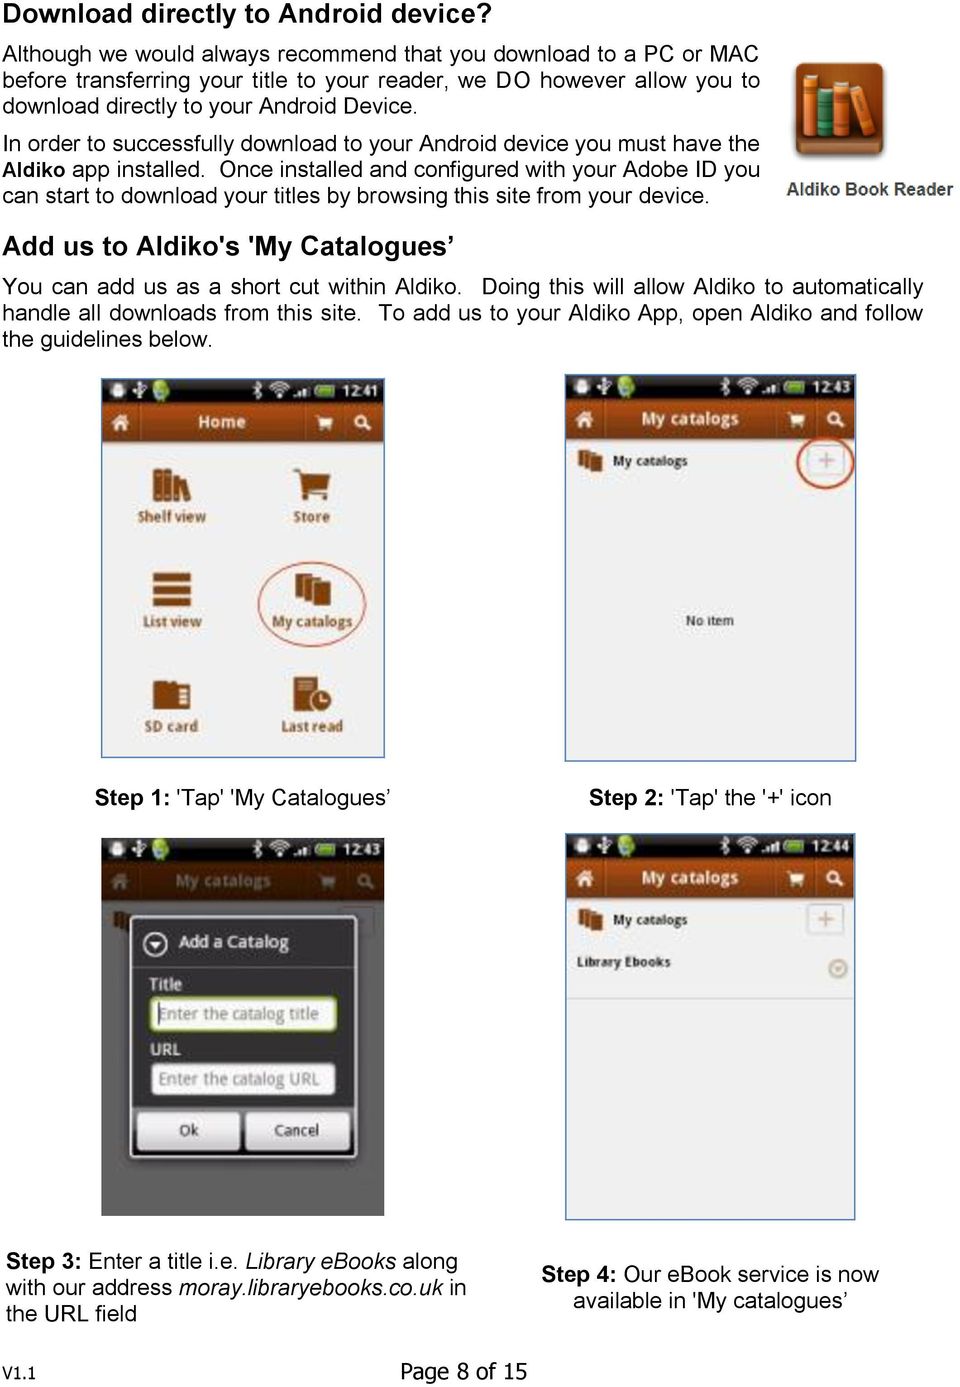 In order to successfully download to your Android device you must have the Aldiko app installed.